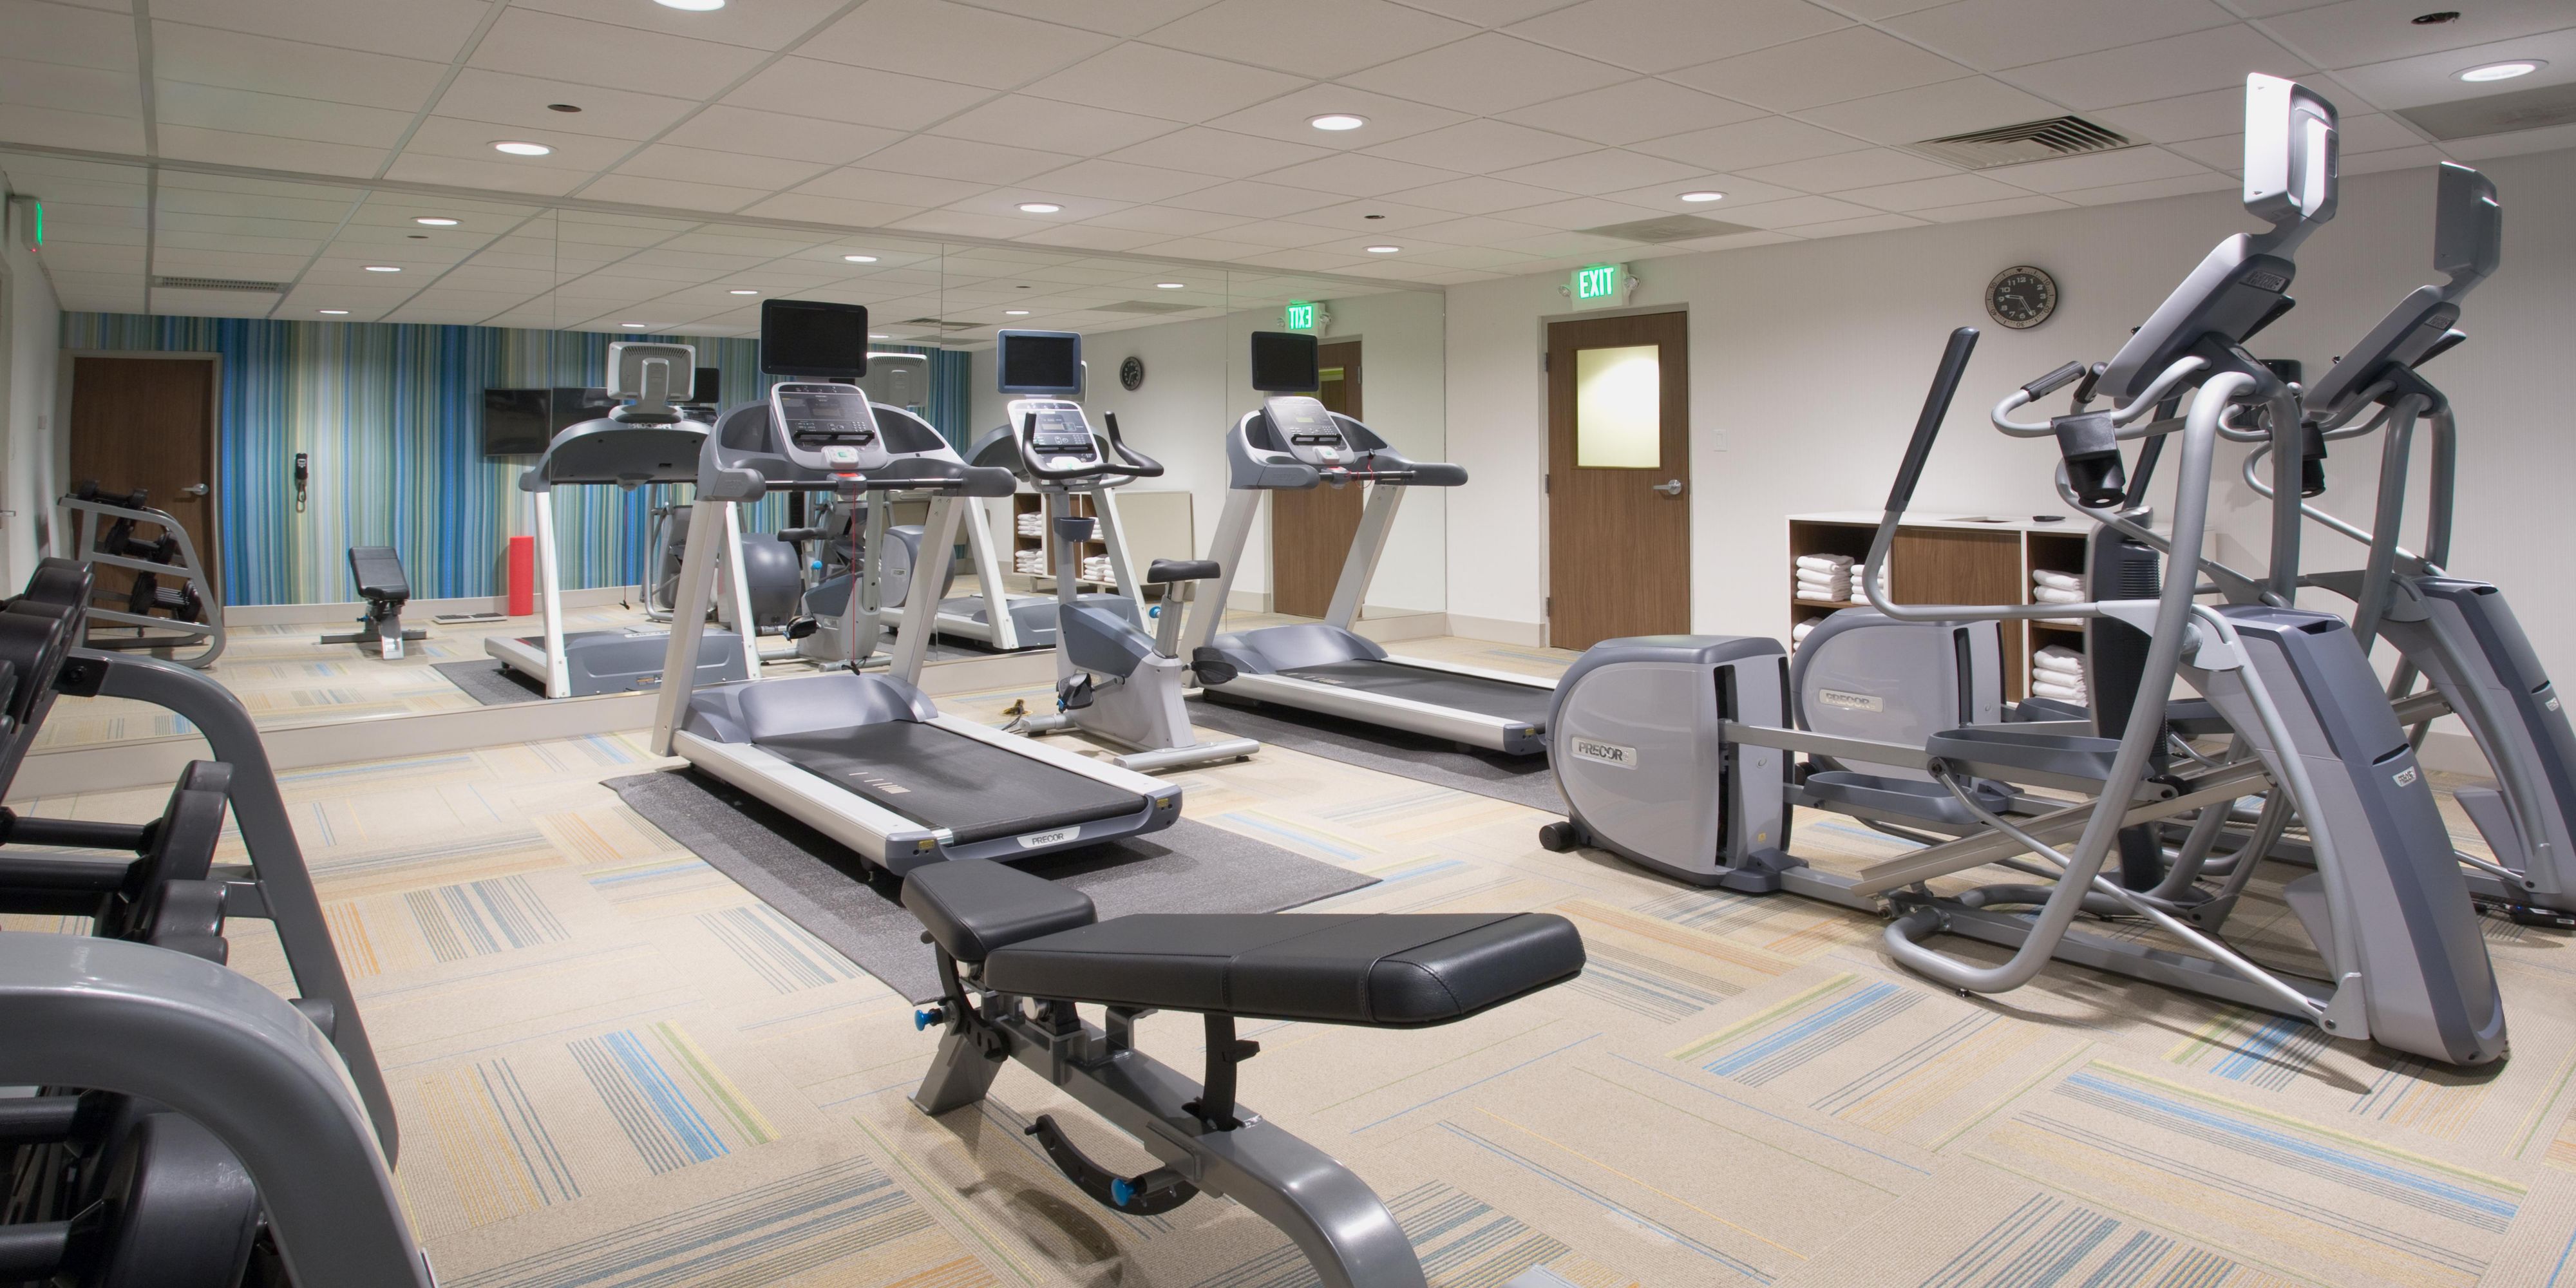 Our onsite fitness center has everything you need to get in a great workout on the road, so you don't have to feel like you are out of your routine. We've got a treadmill, elliptical, spin bike and a full set of dumbells.